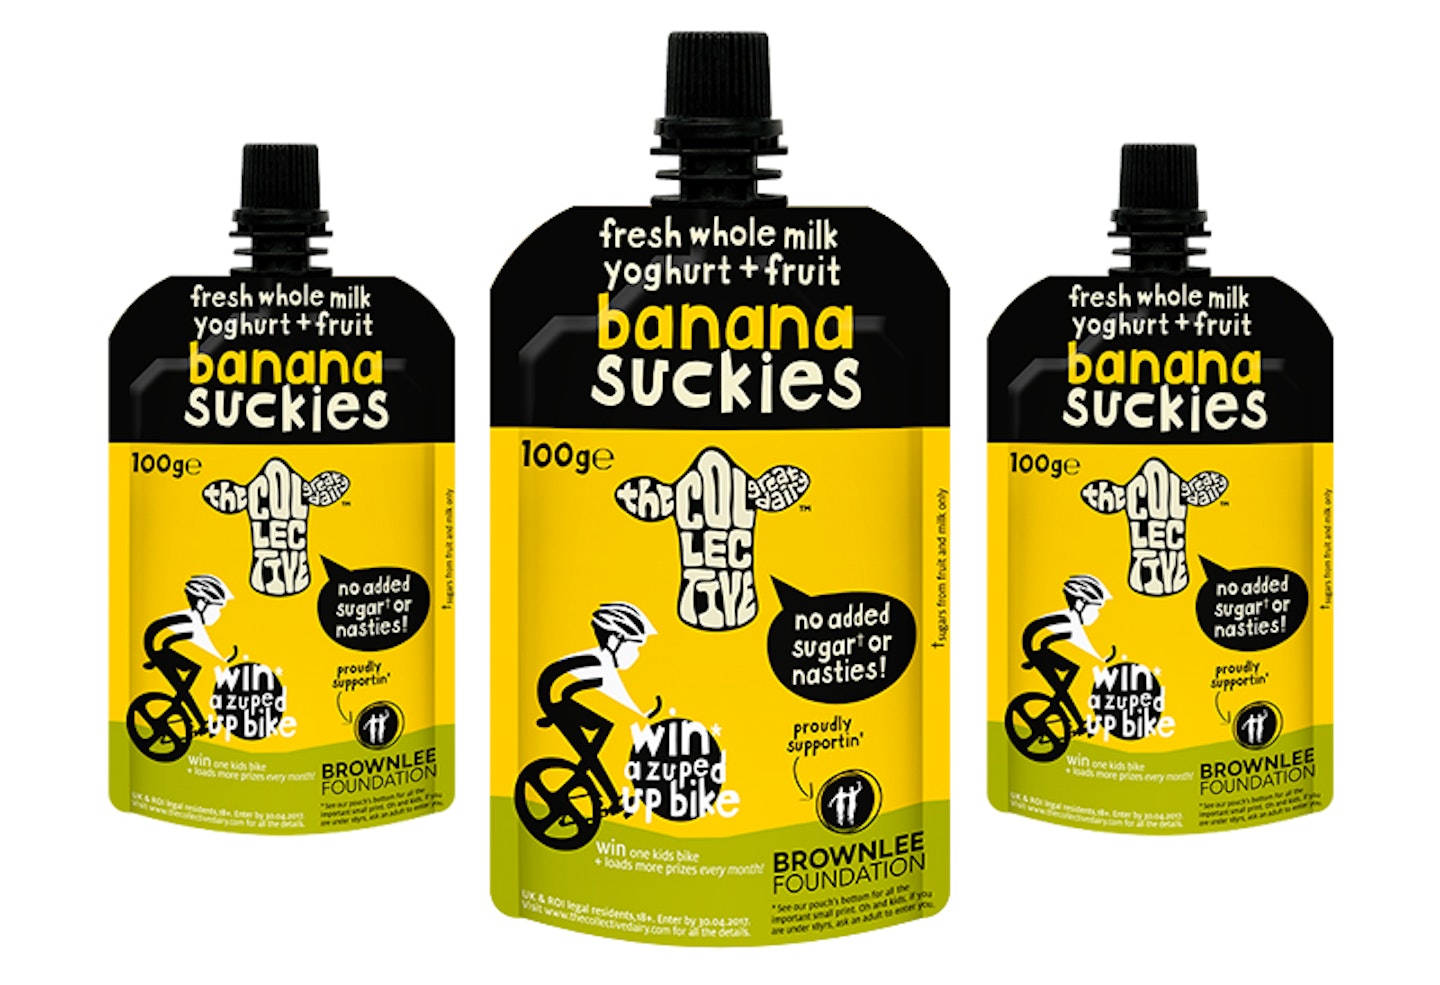 Banana suckies pouches, 79p per 100g pouch, available from Waitrose and Ocado (thecollectivedairy.co.uk)